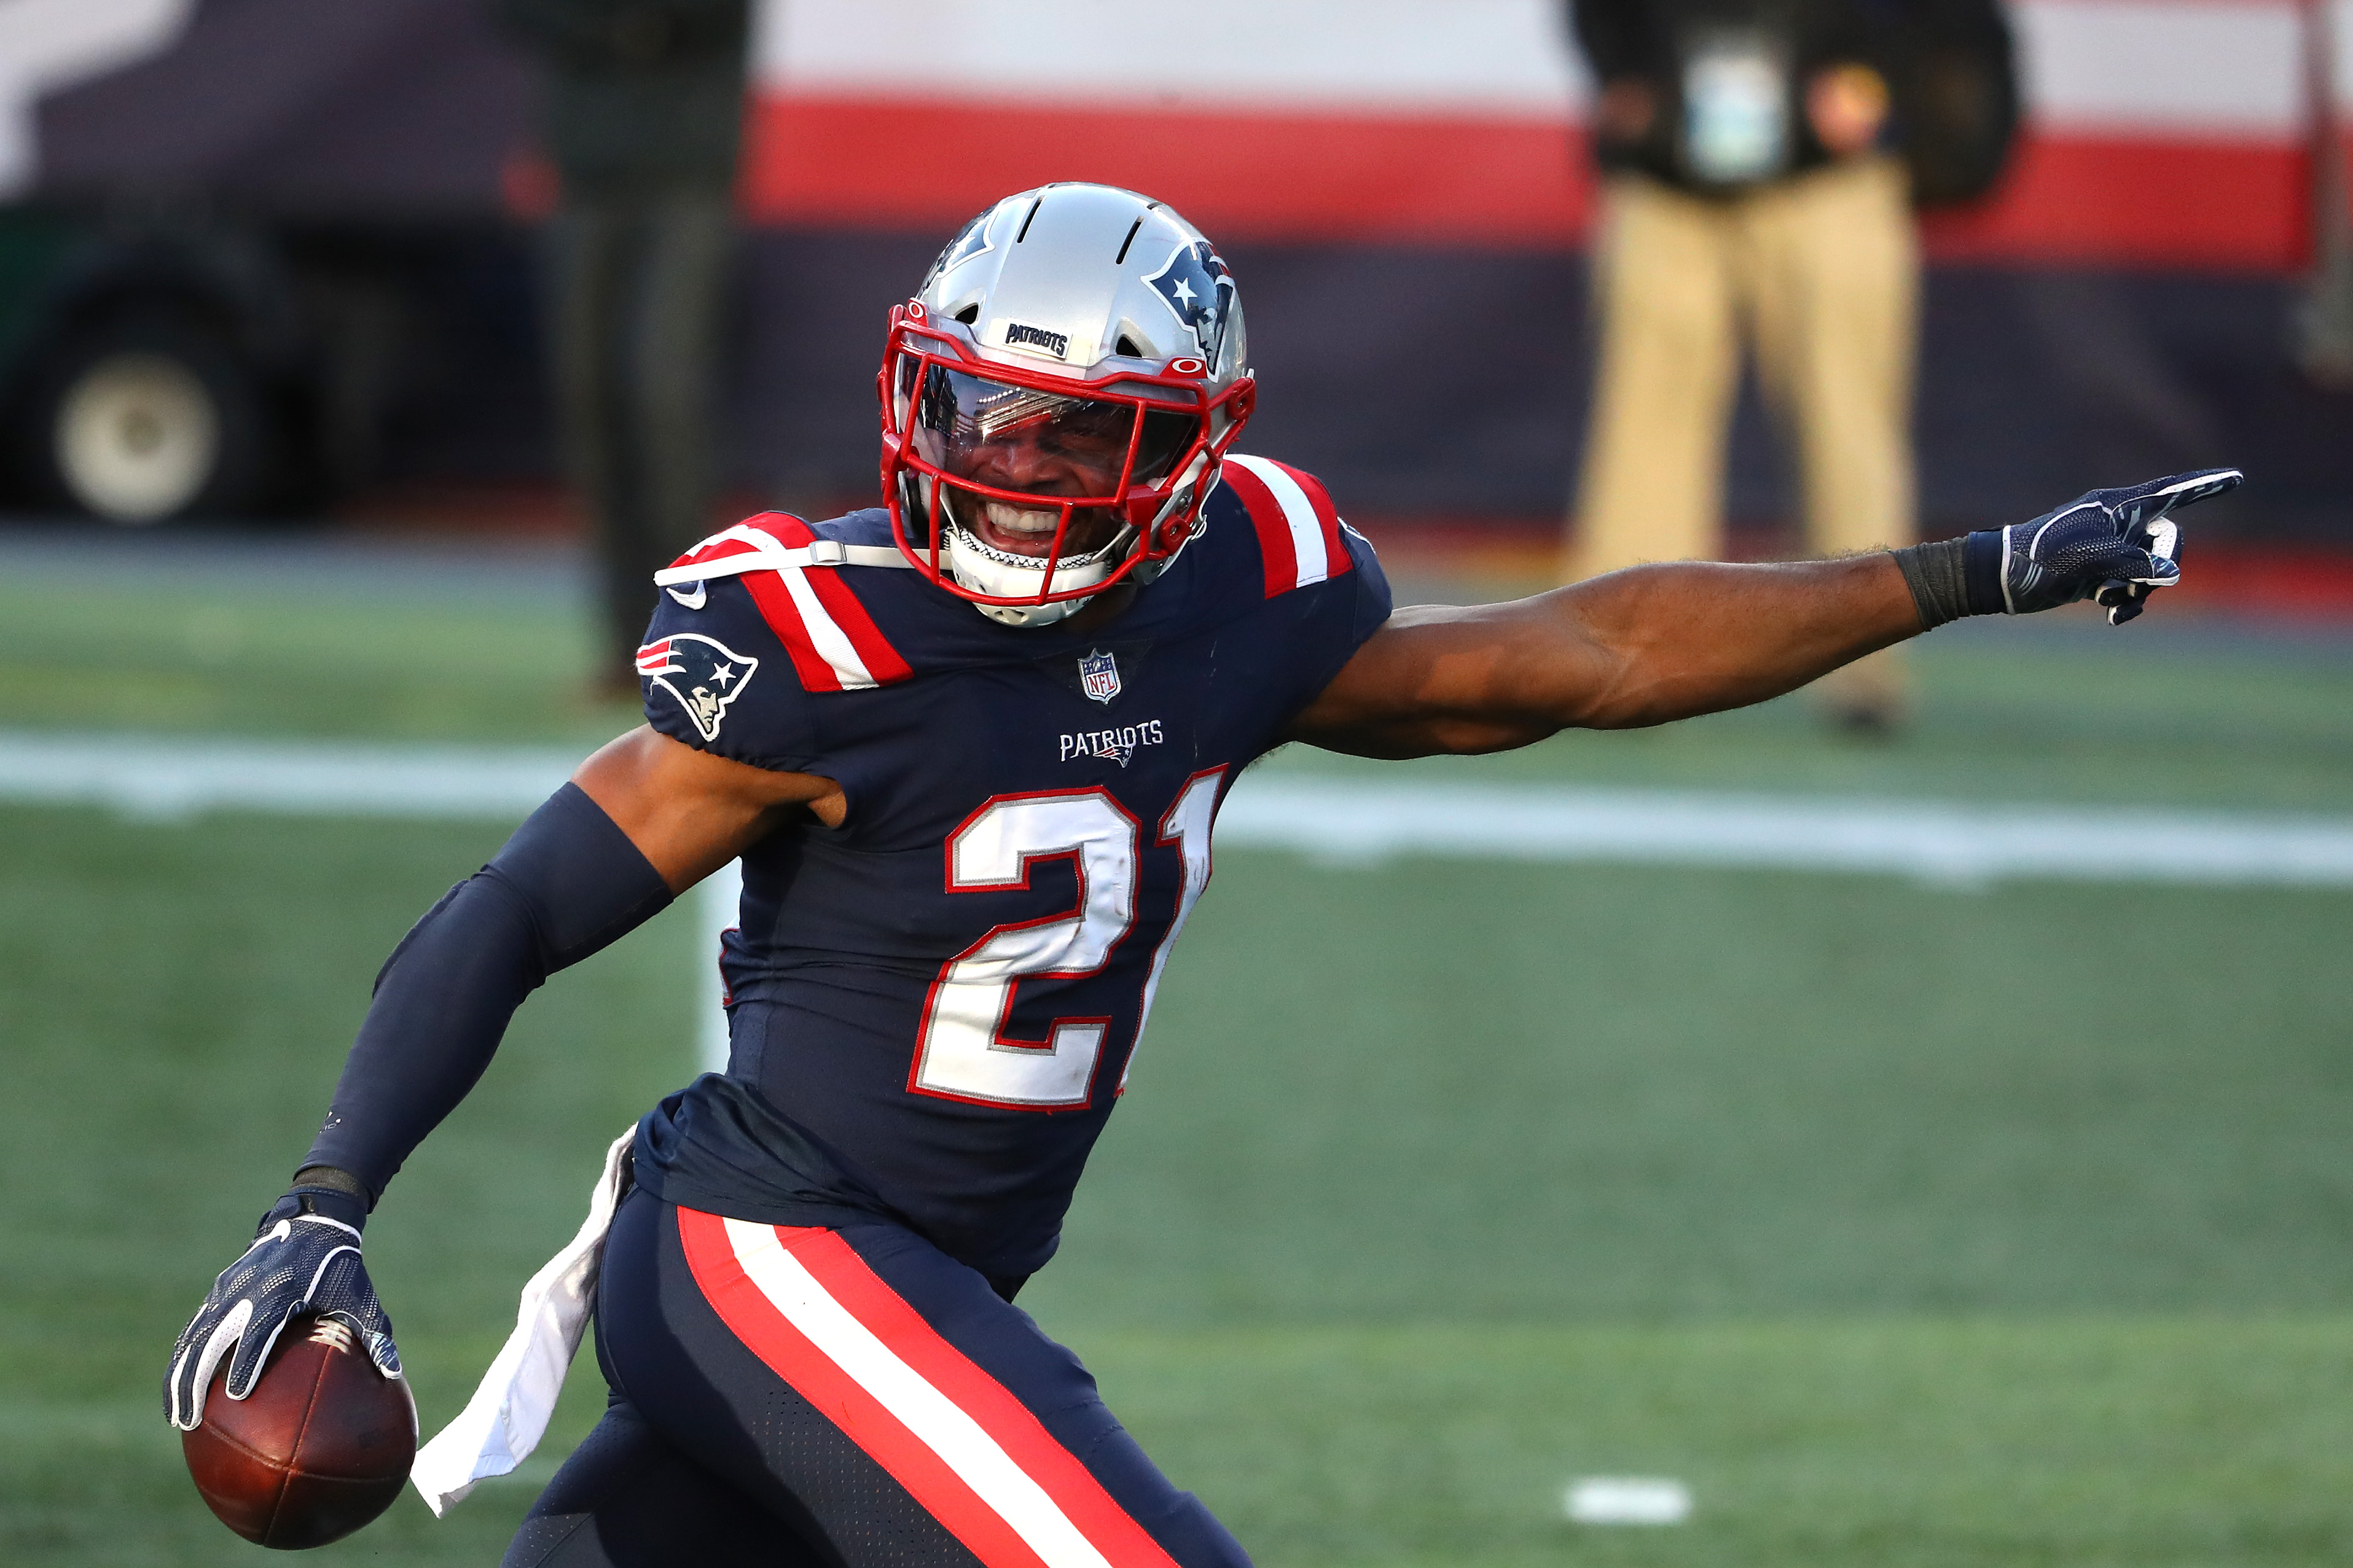 UnDrafted Files The Top 10 UnDrafted NFL Players For 2021 LockerReport